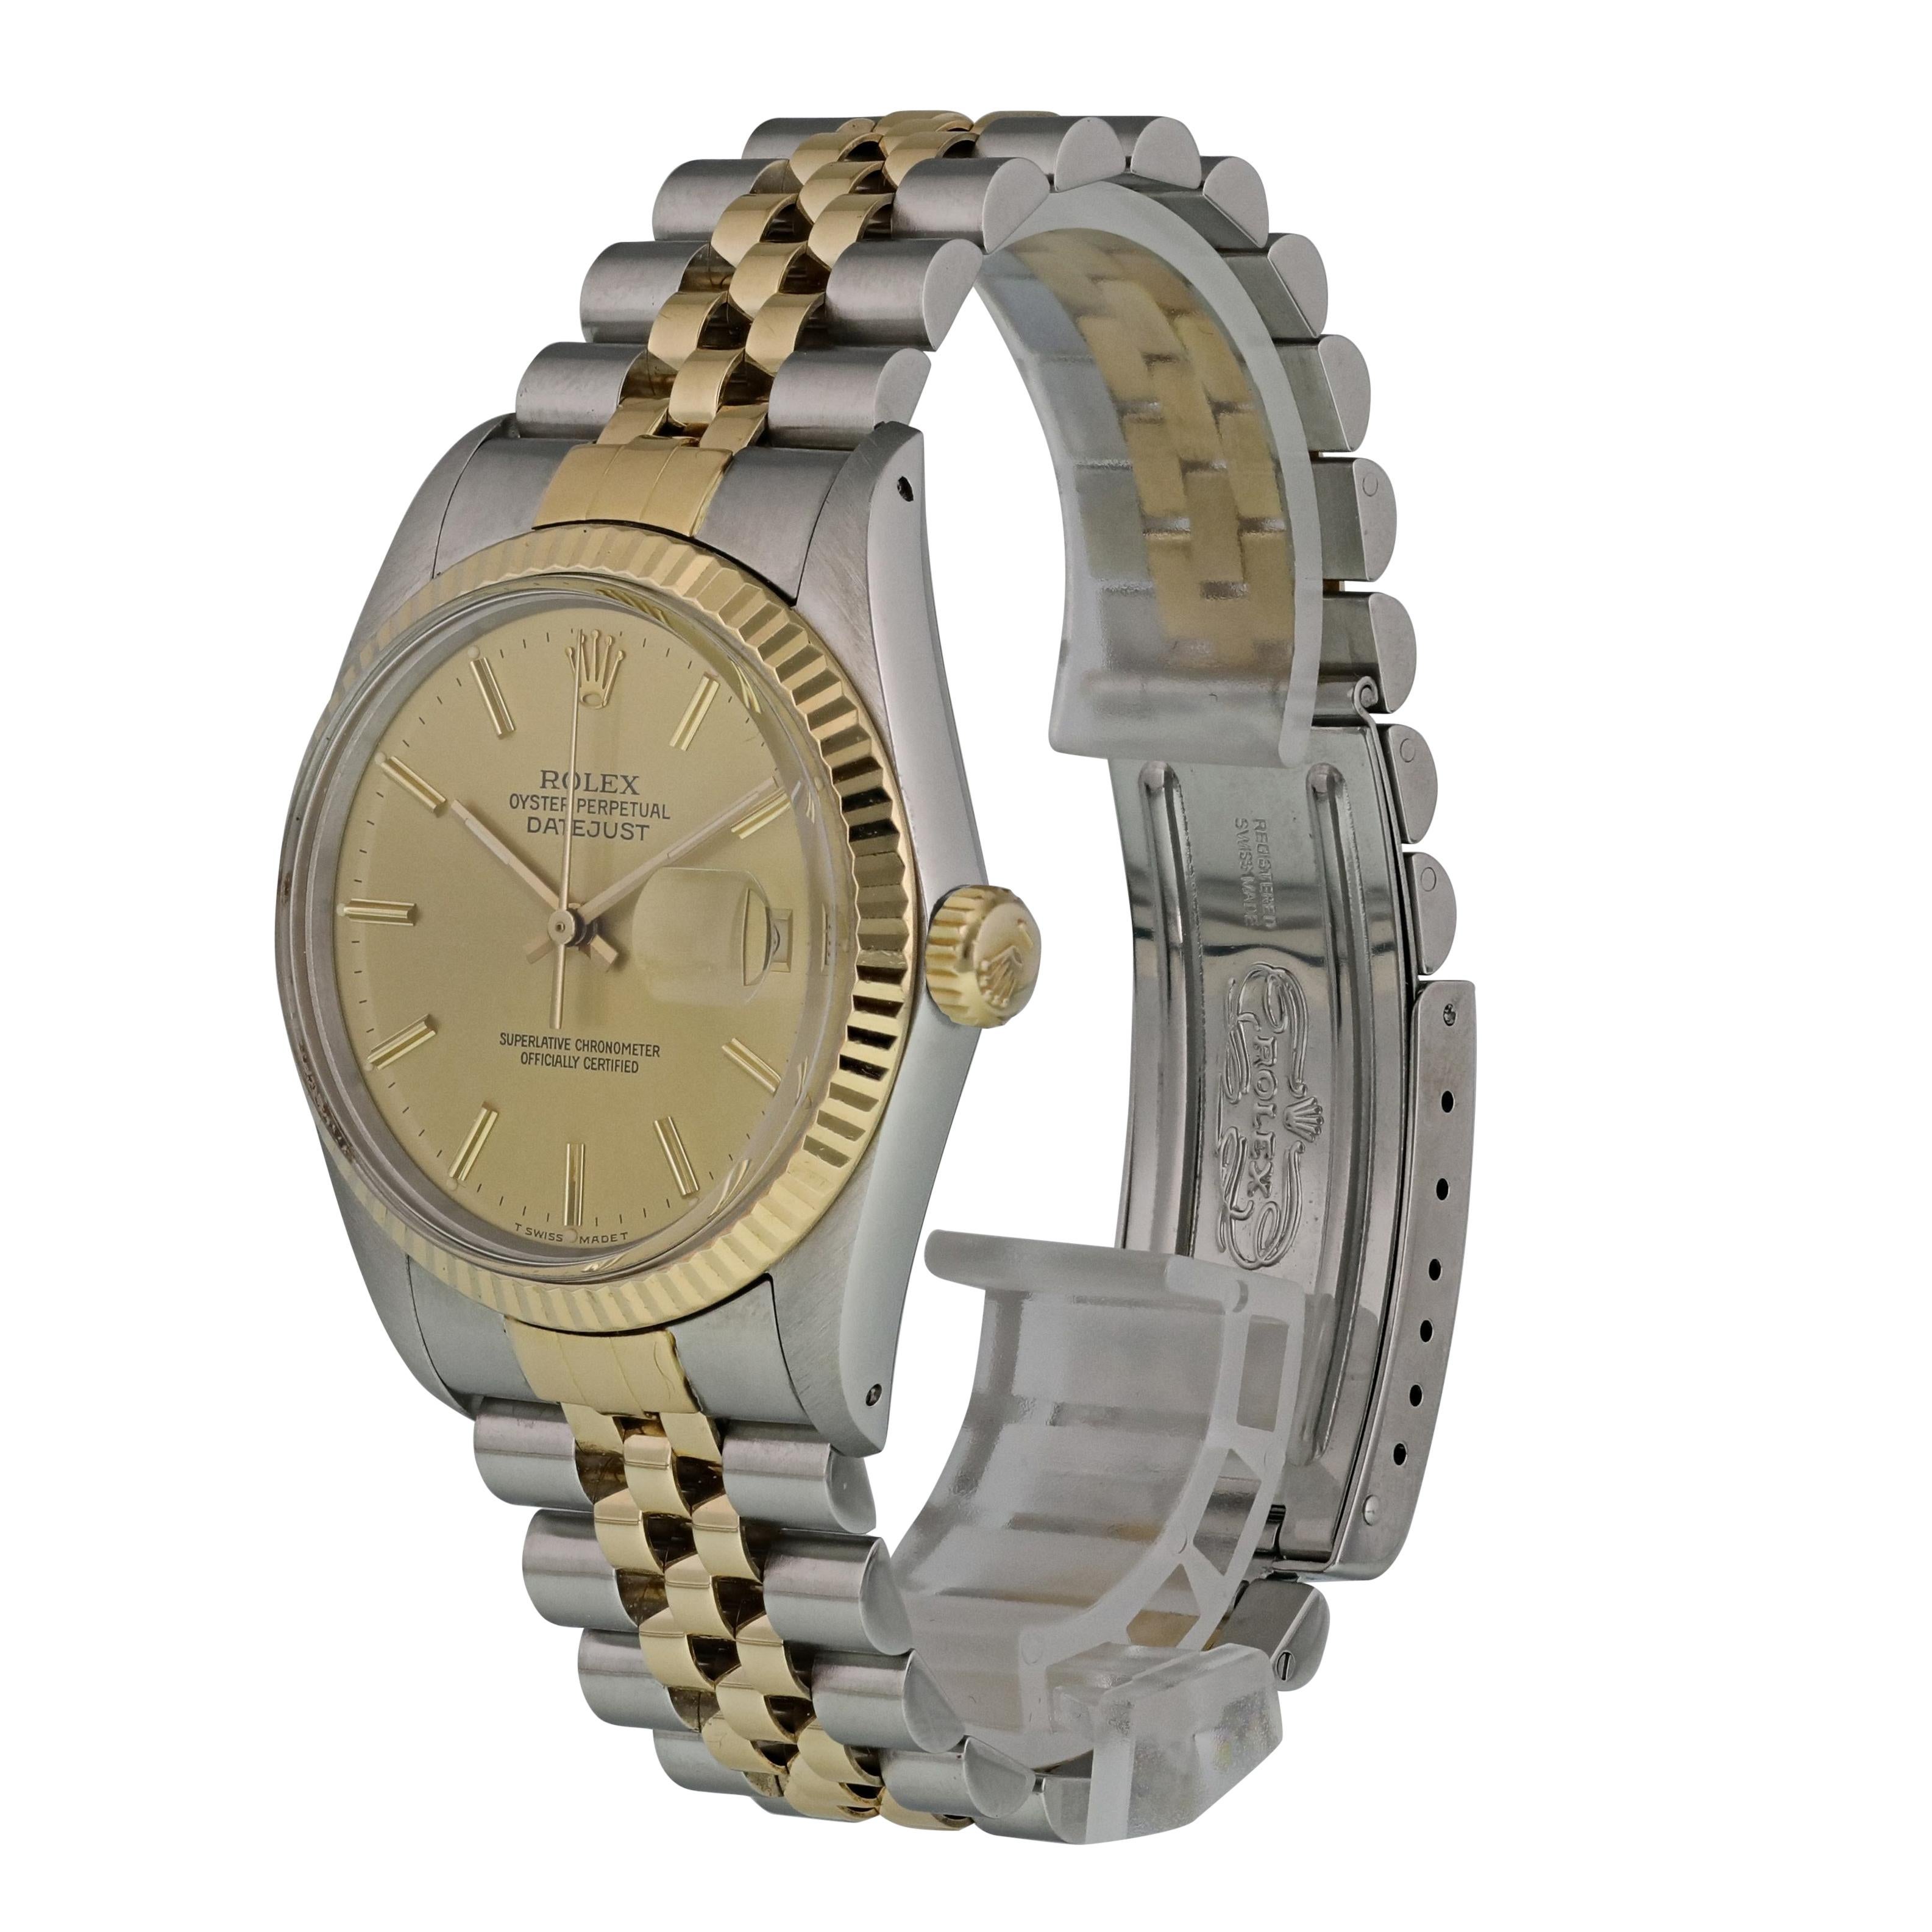 Rolex Datejust 16013 Men's Watch
36mm Stainless Steel case. 
Yellow Gold Stationary bezel. 
Champagne dial with luminous gold hands and inde hour markers. 
Minute markers on the outer dial. 
Date display at the 3 o'clock position. 
Stainless Steel